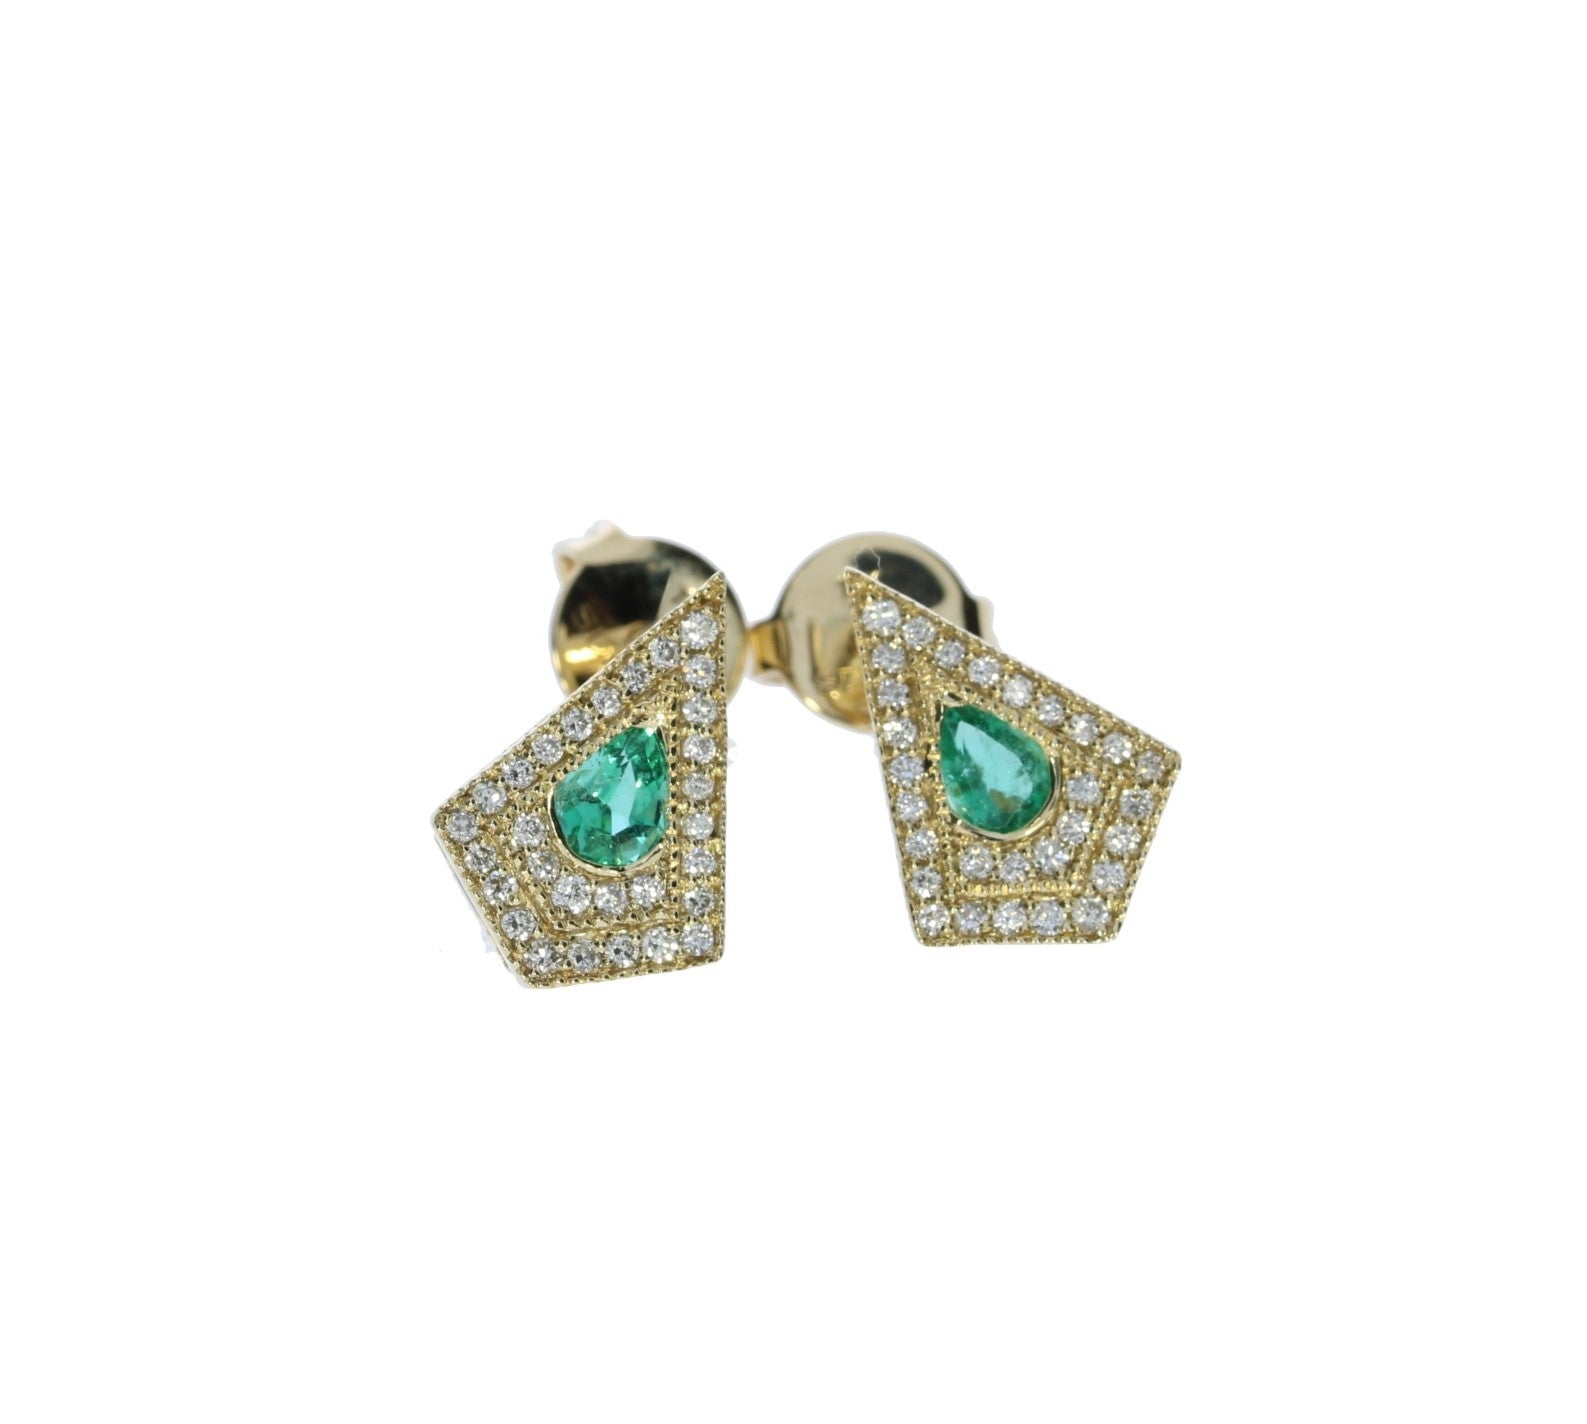 Yellow Gold Kite Shaped Emerald and Diamond Earrings - Colored Stone Earrings